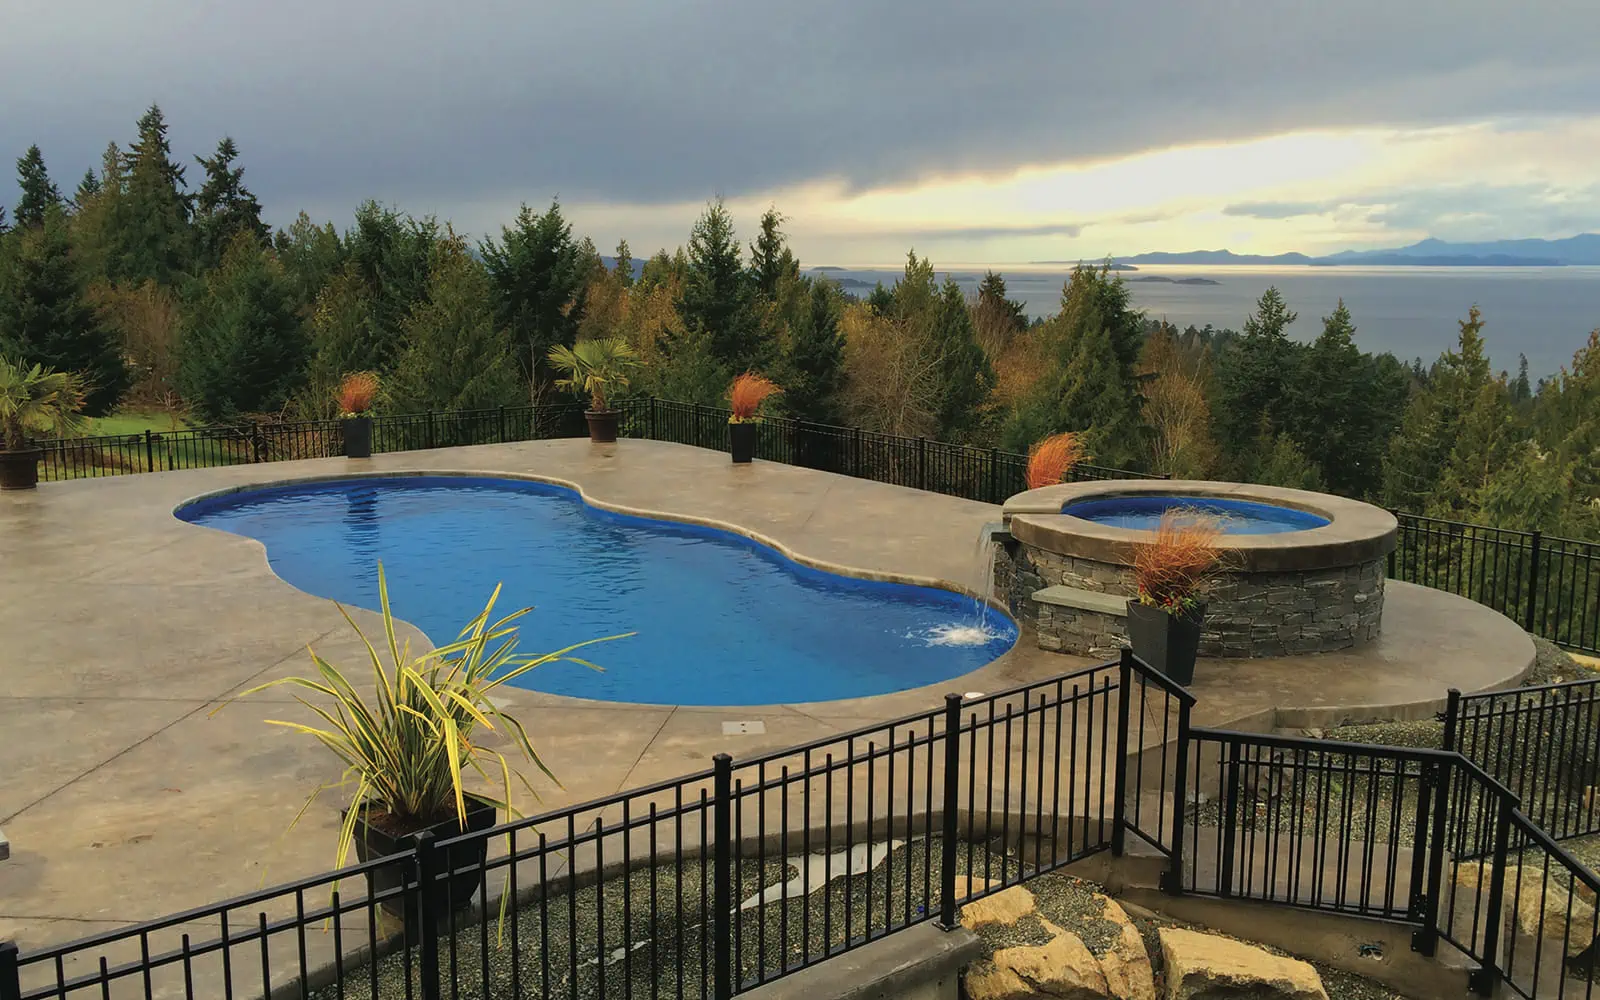 Blue Orca Pools is a proud dealer and supplier of quality fiberglass pools in the Vancouver area and beyond